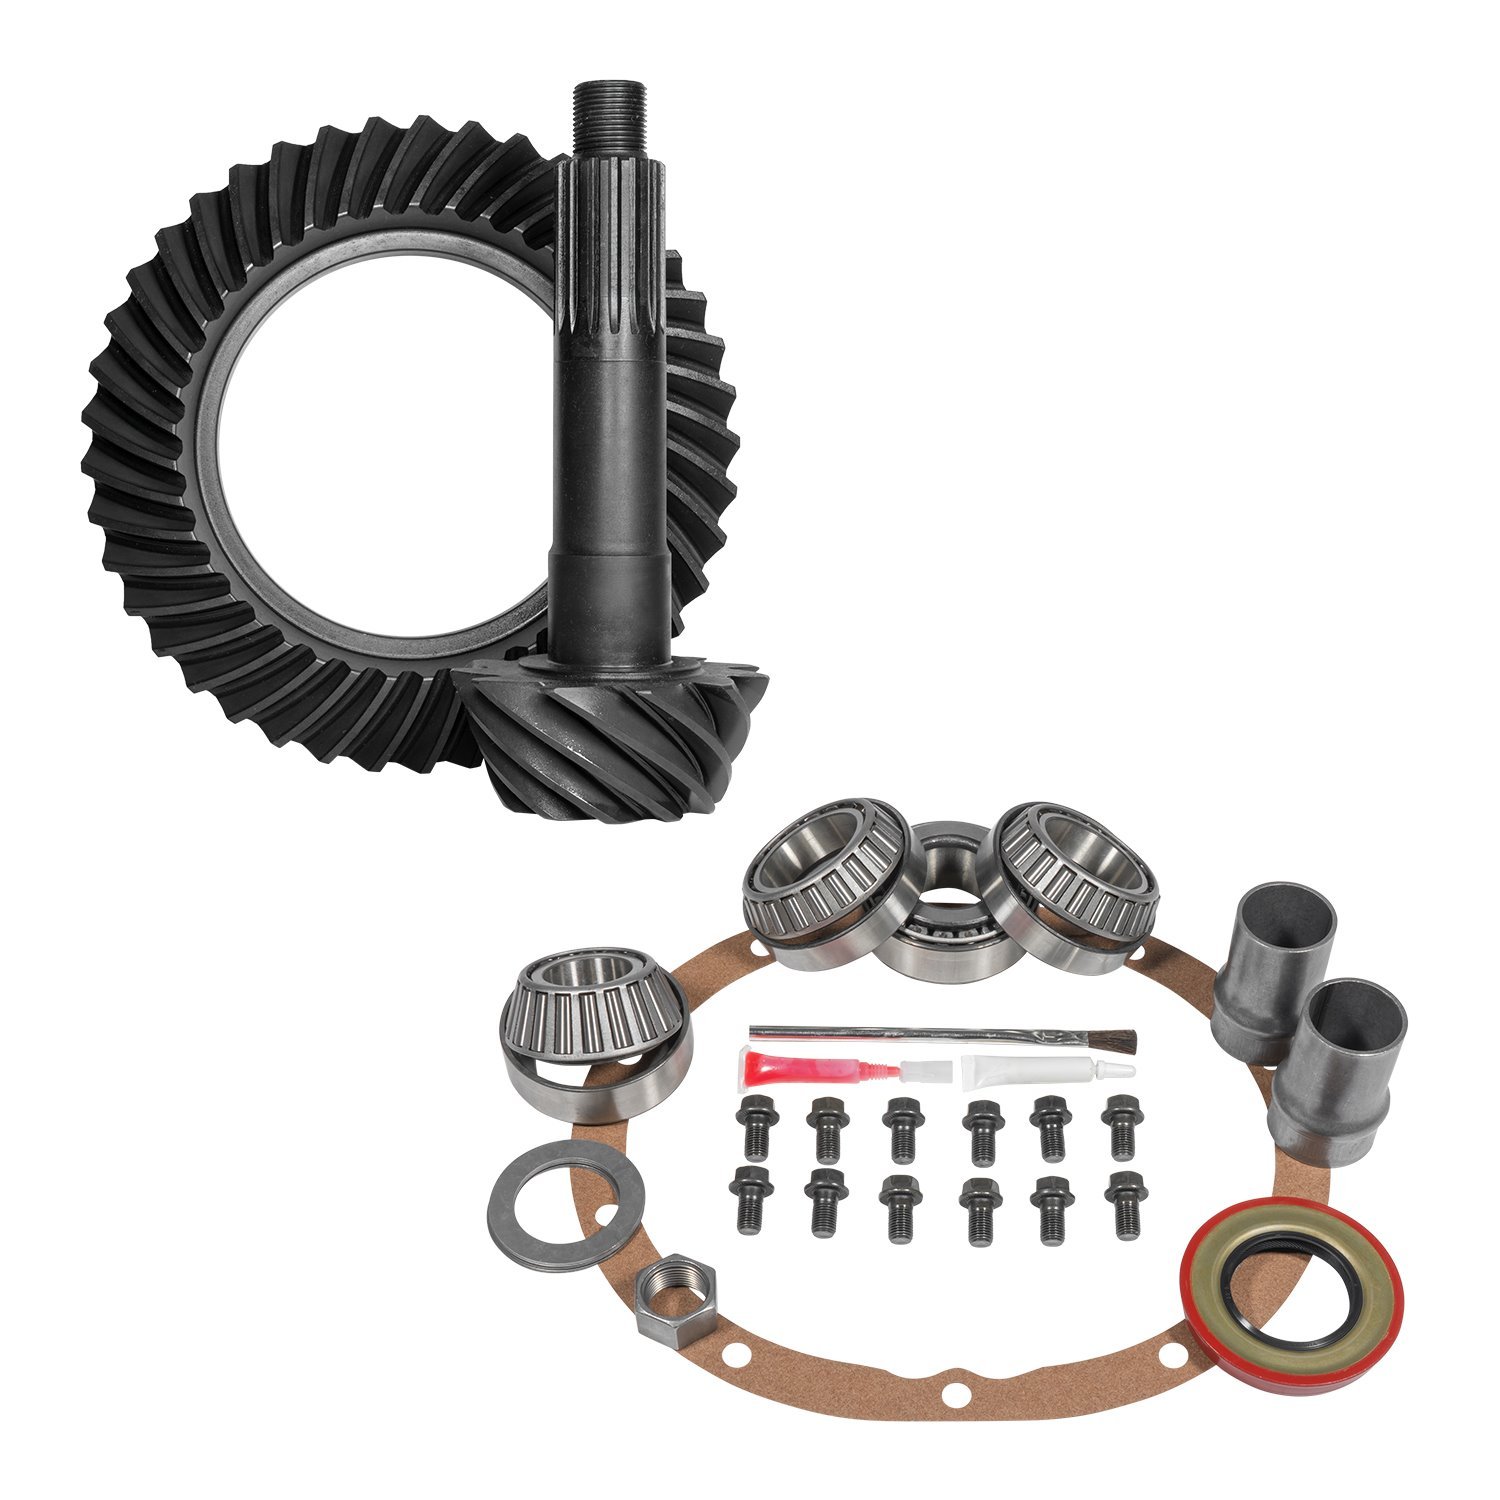 Muscle Car Re-Gear Kit For GM 55P Differential, 17 Spline, 3.73 Ratio